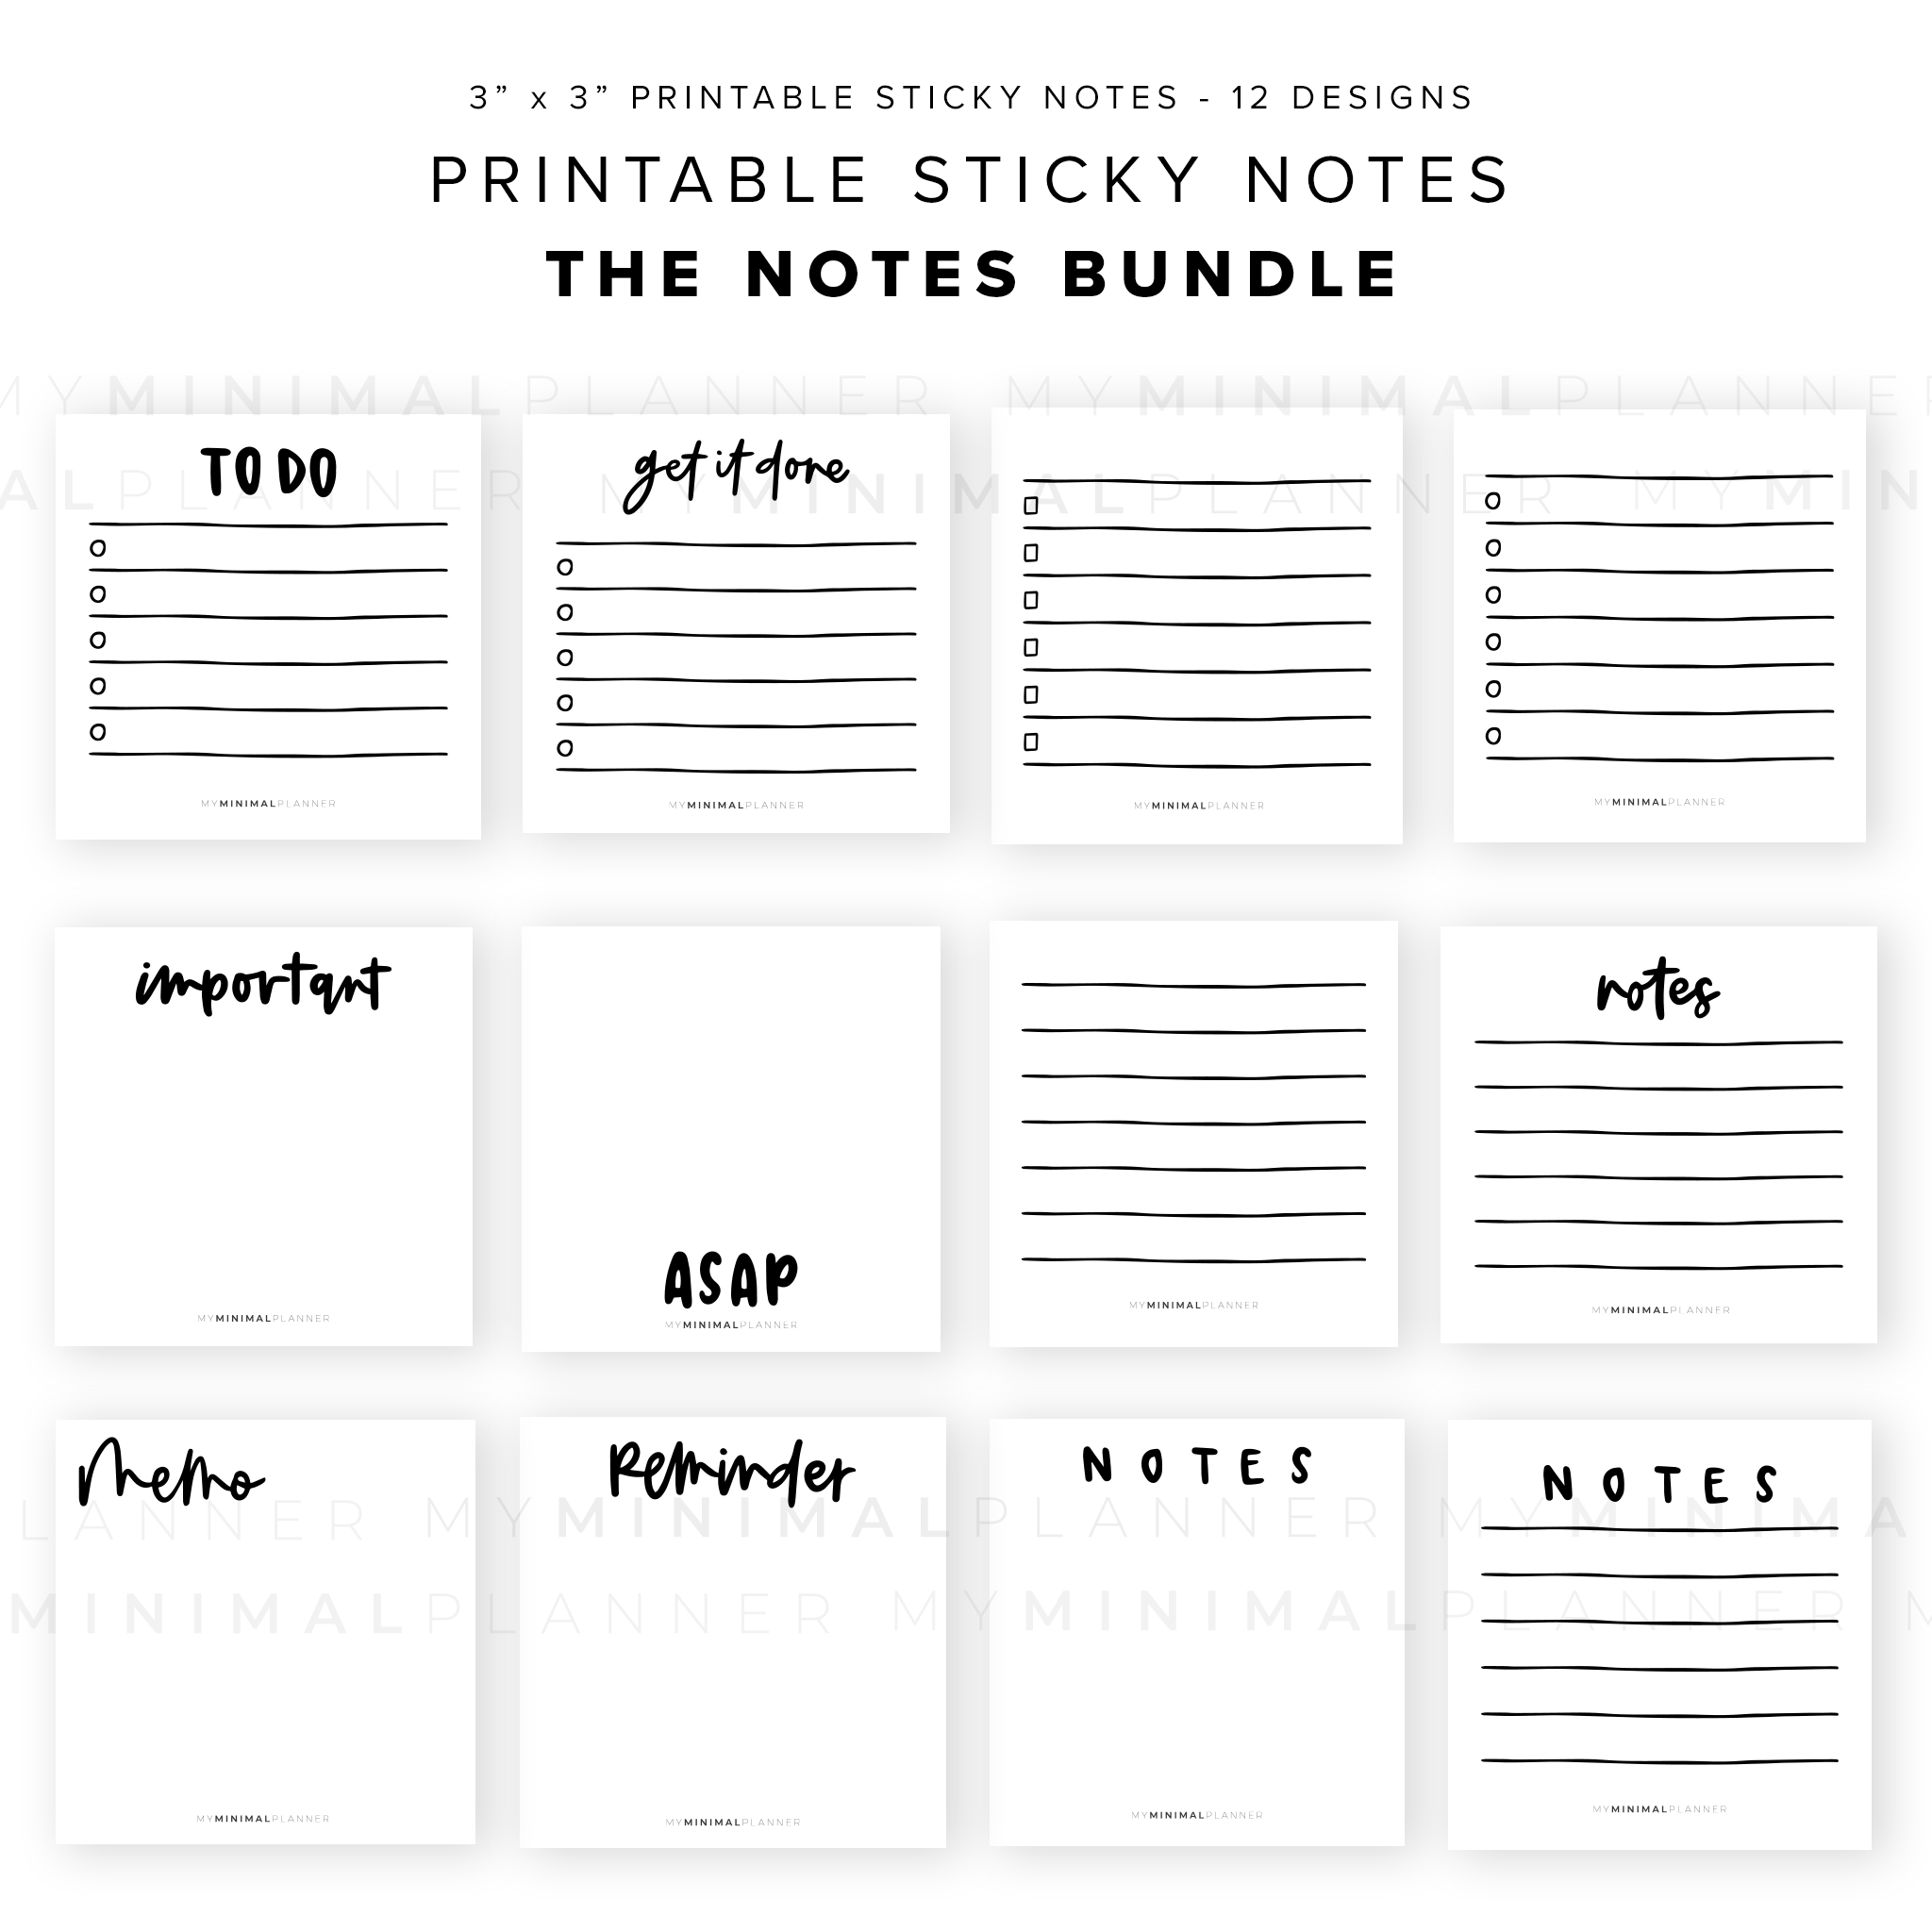 PSN02 - The Notes Bundle - Printable Sticky Notes